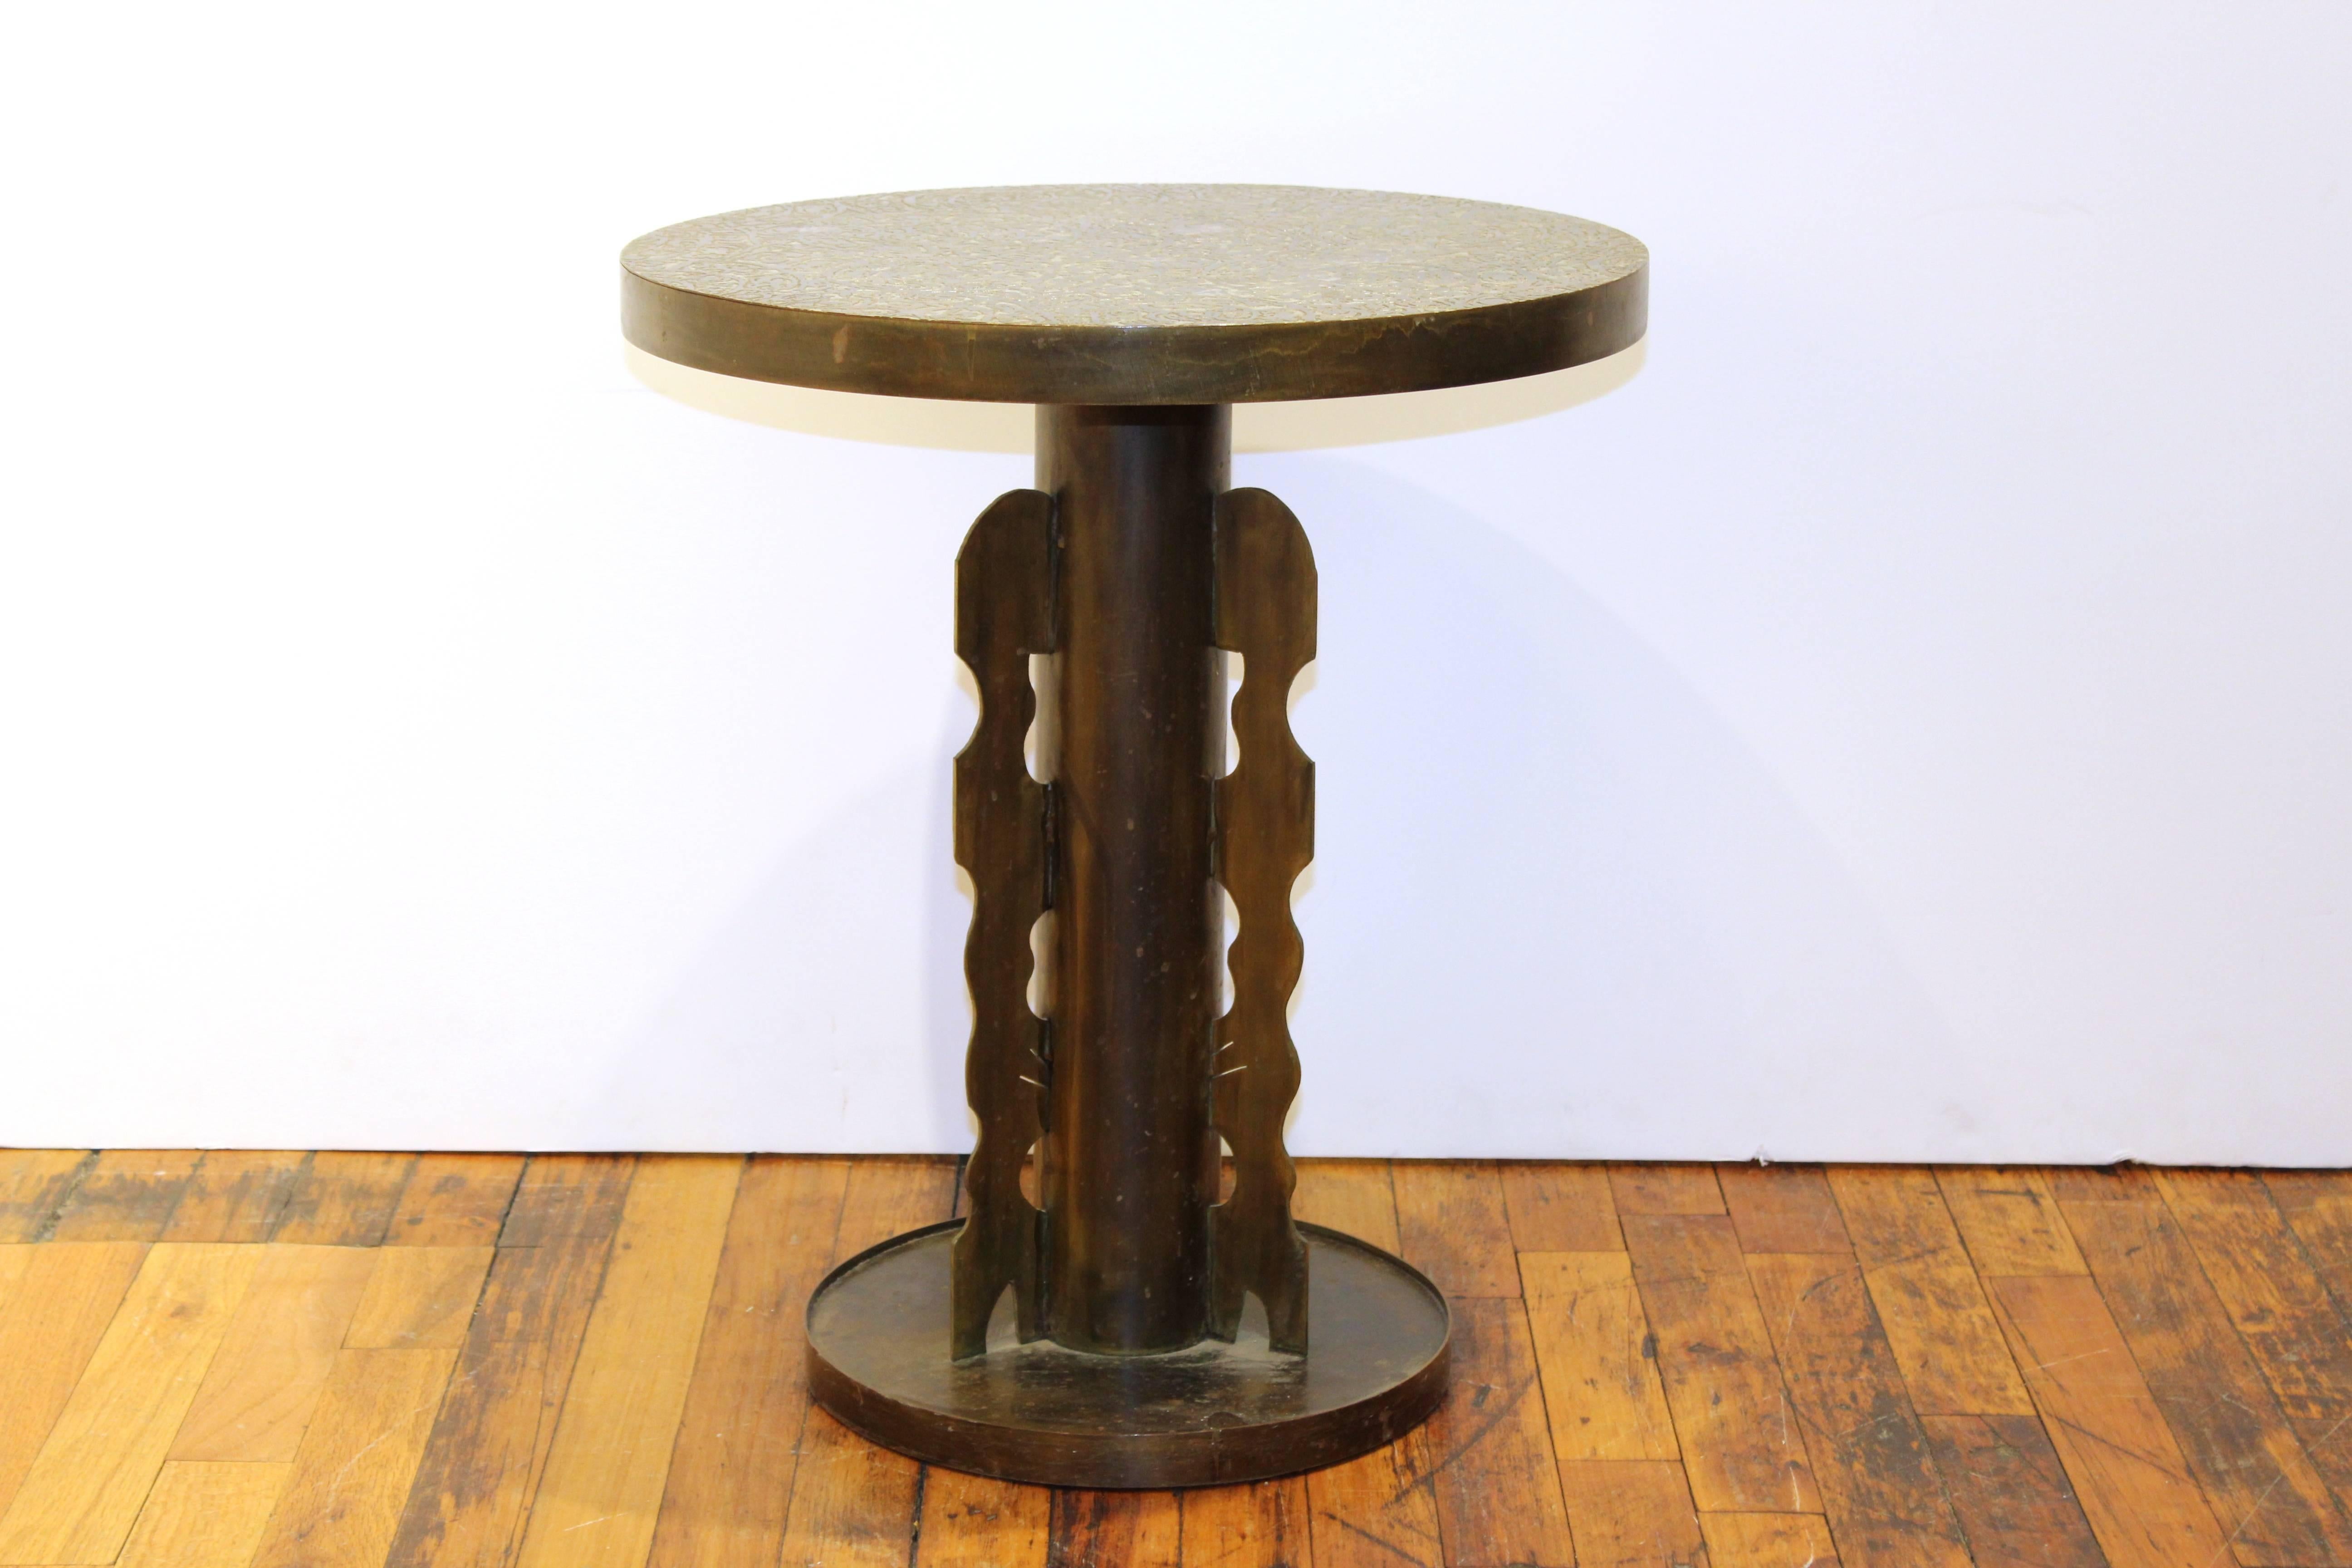 A unique side table designed by Erwine and Estelle Laverine with etched brass Etruscan pattern and column-like base.

110376.